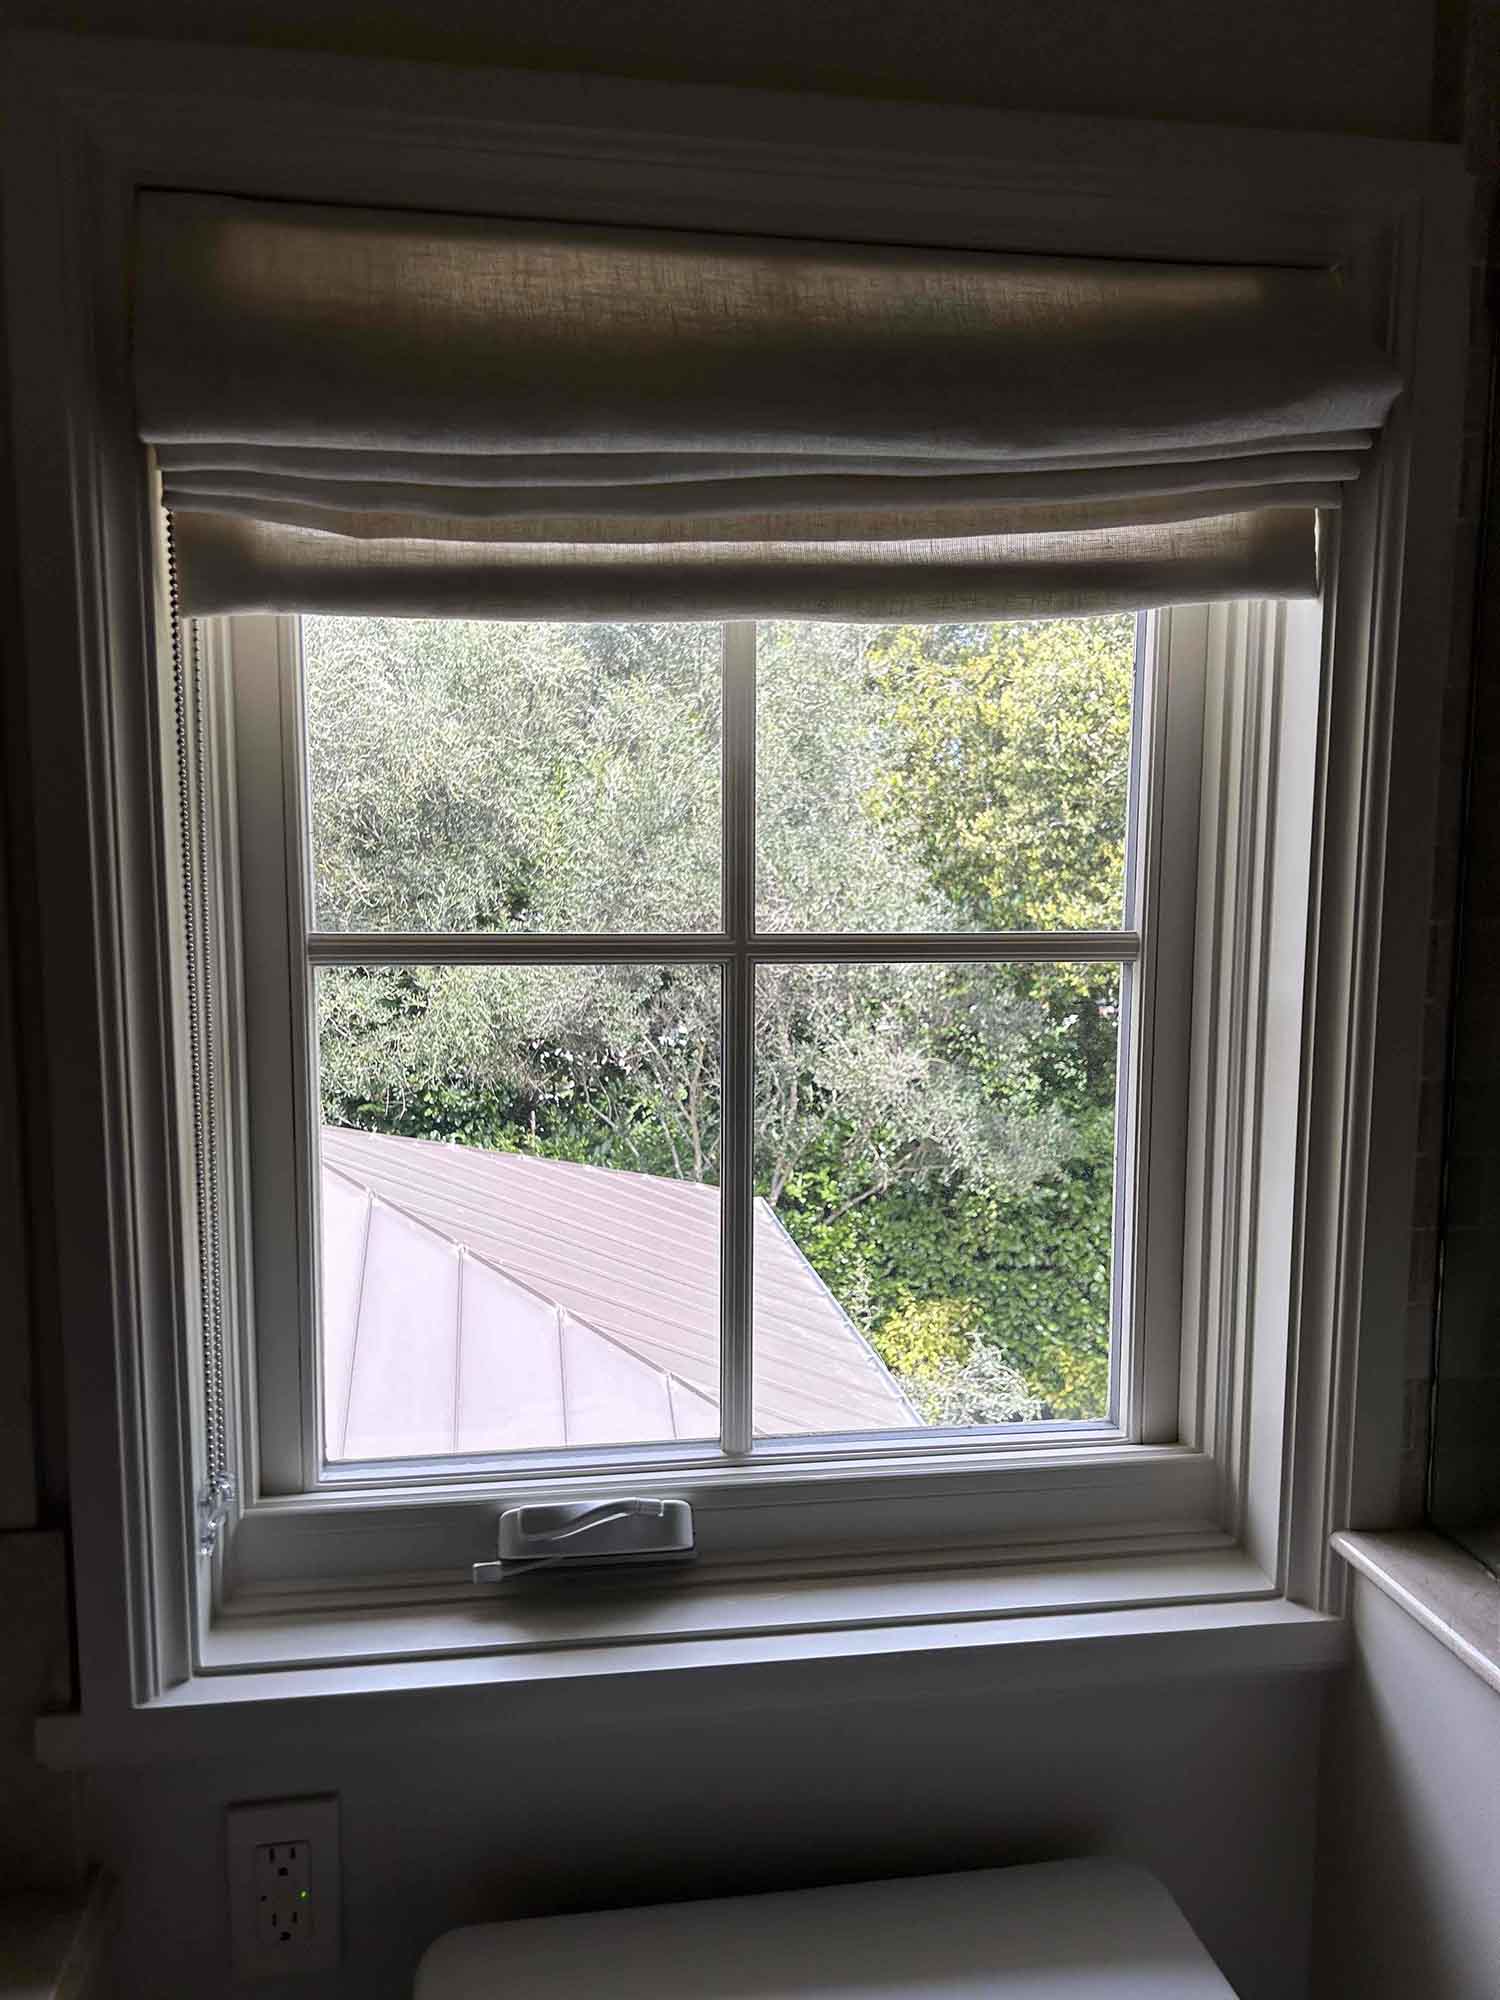 The Best Sun Control Window Tint for Atherton, CA Homes. Installed by ClimatePro.